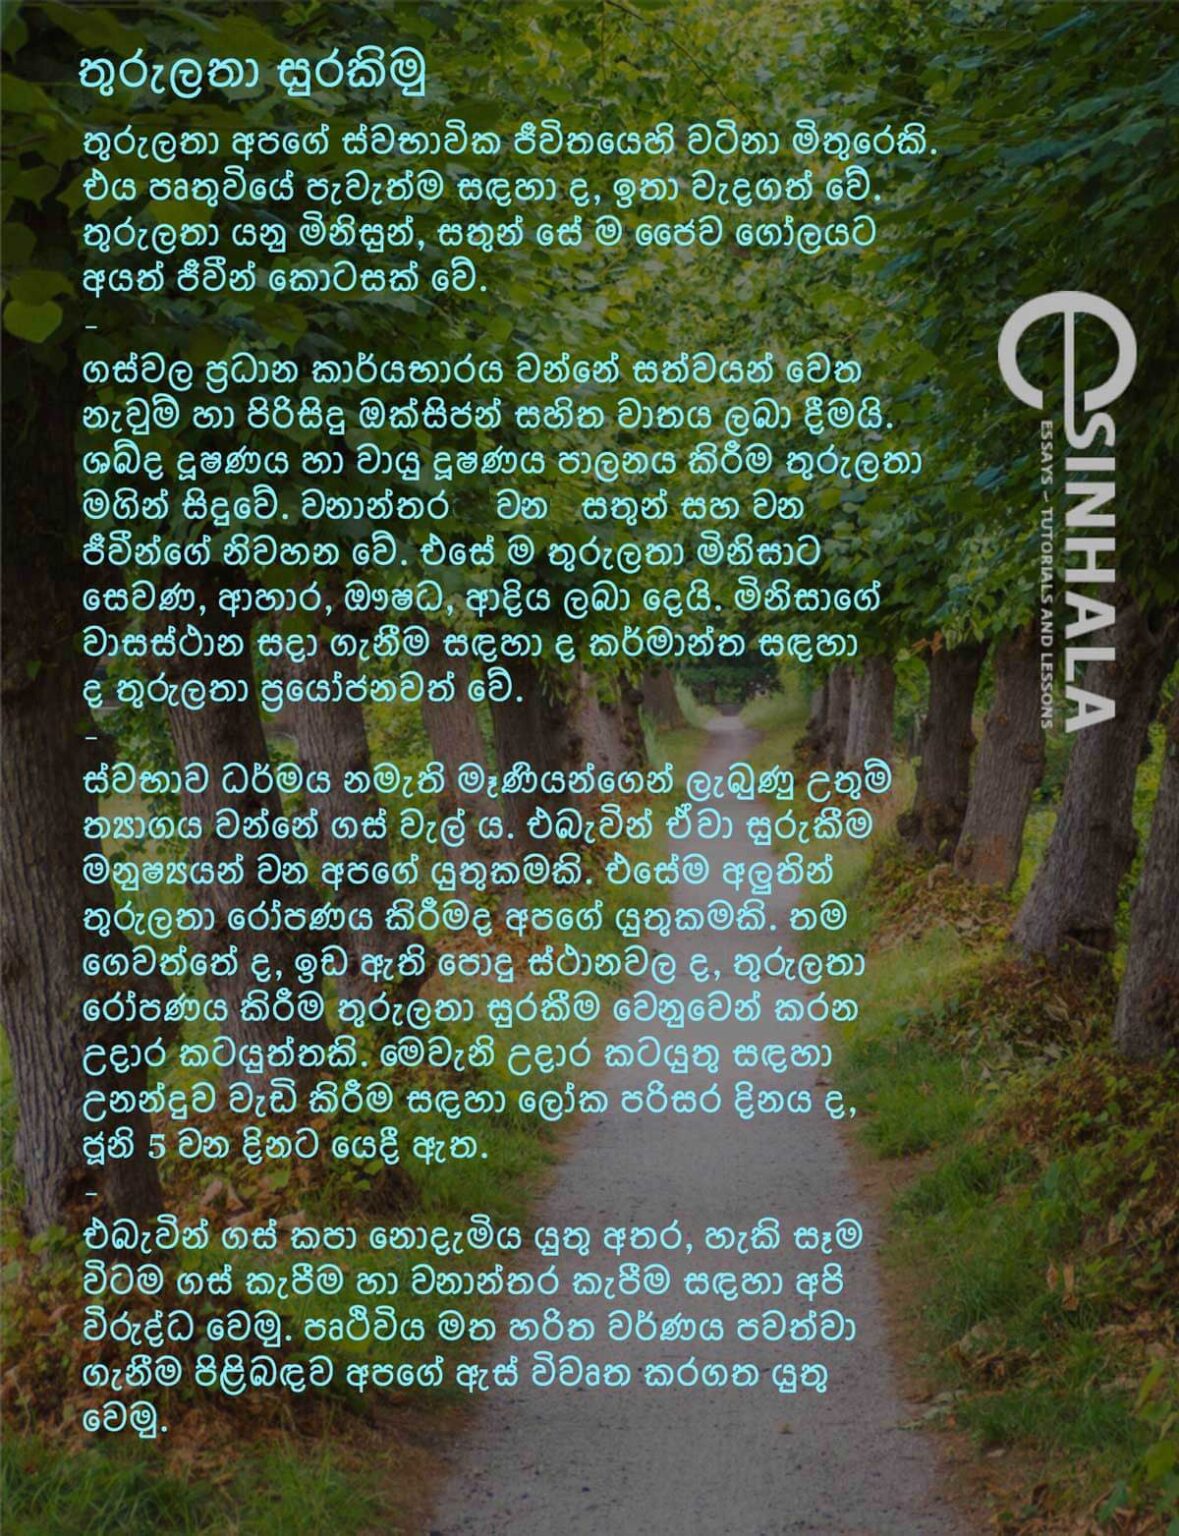 Let's protect the trees - Grade 6 - Sinhala Essays